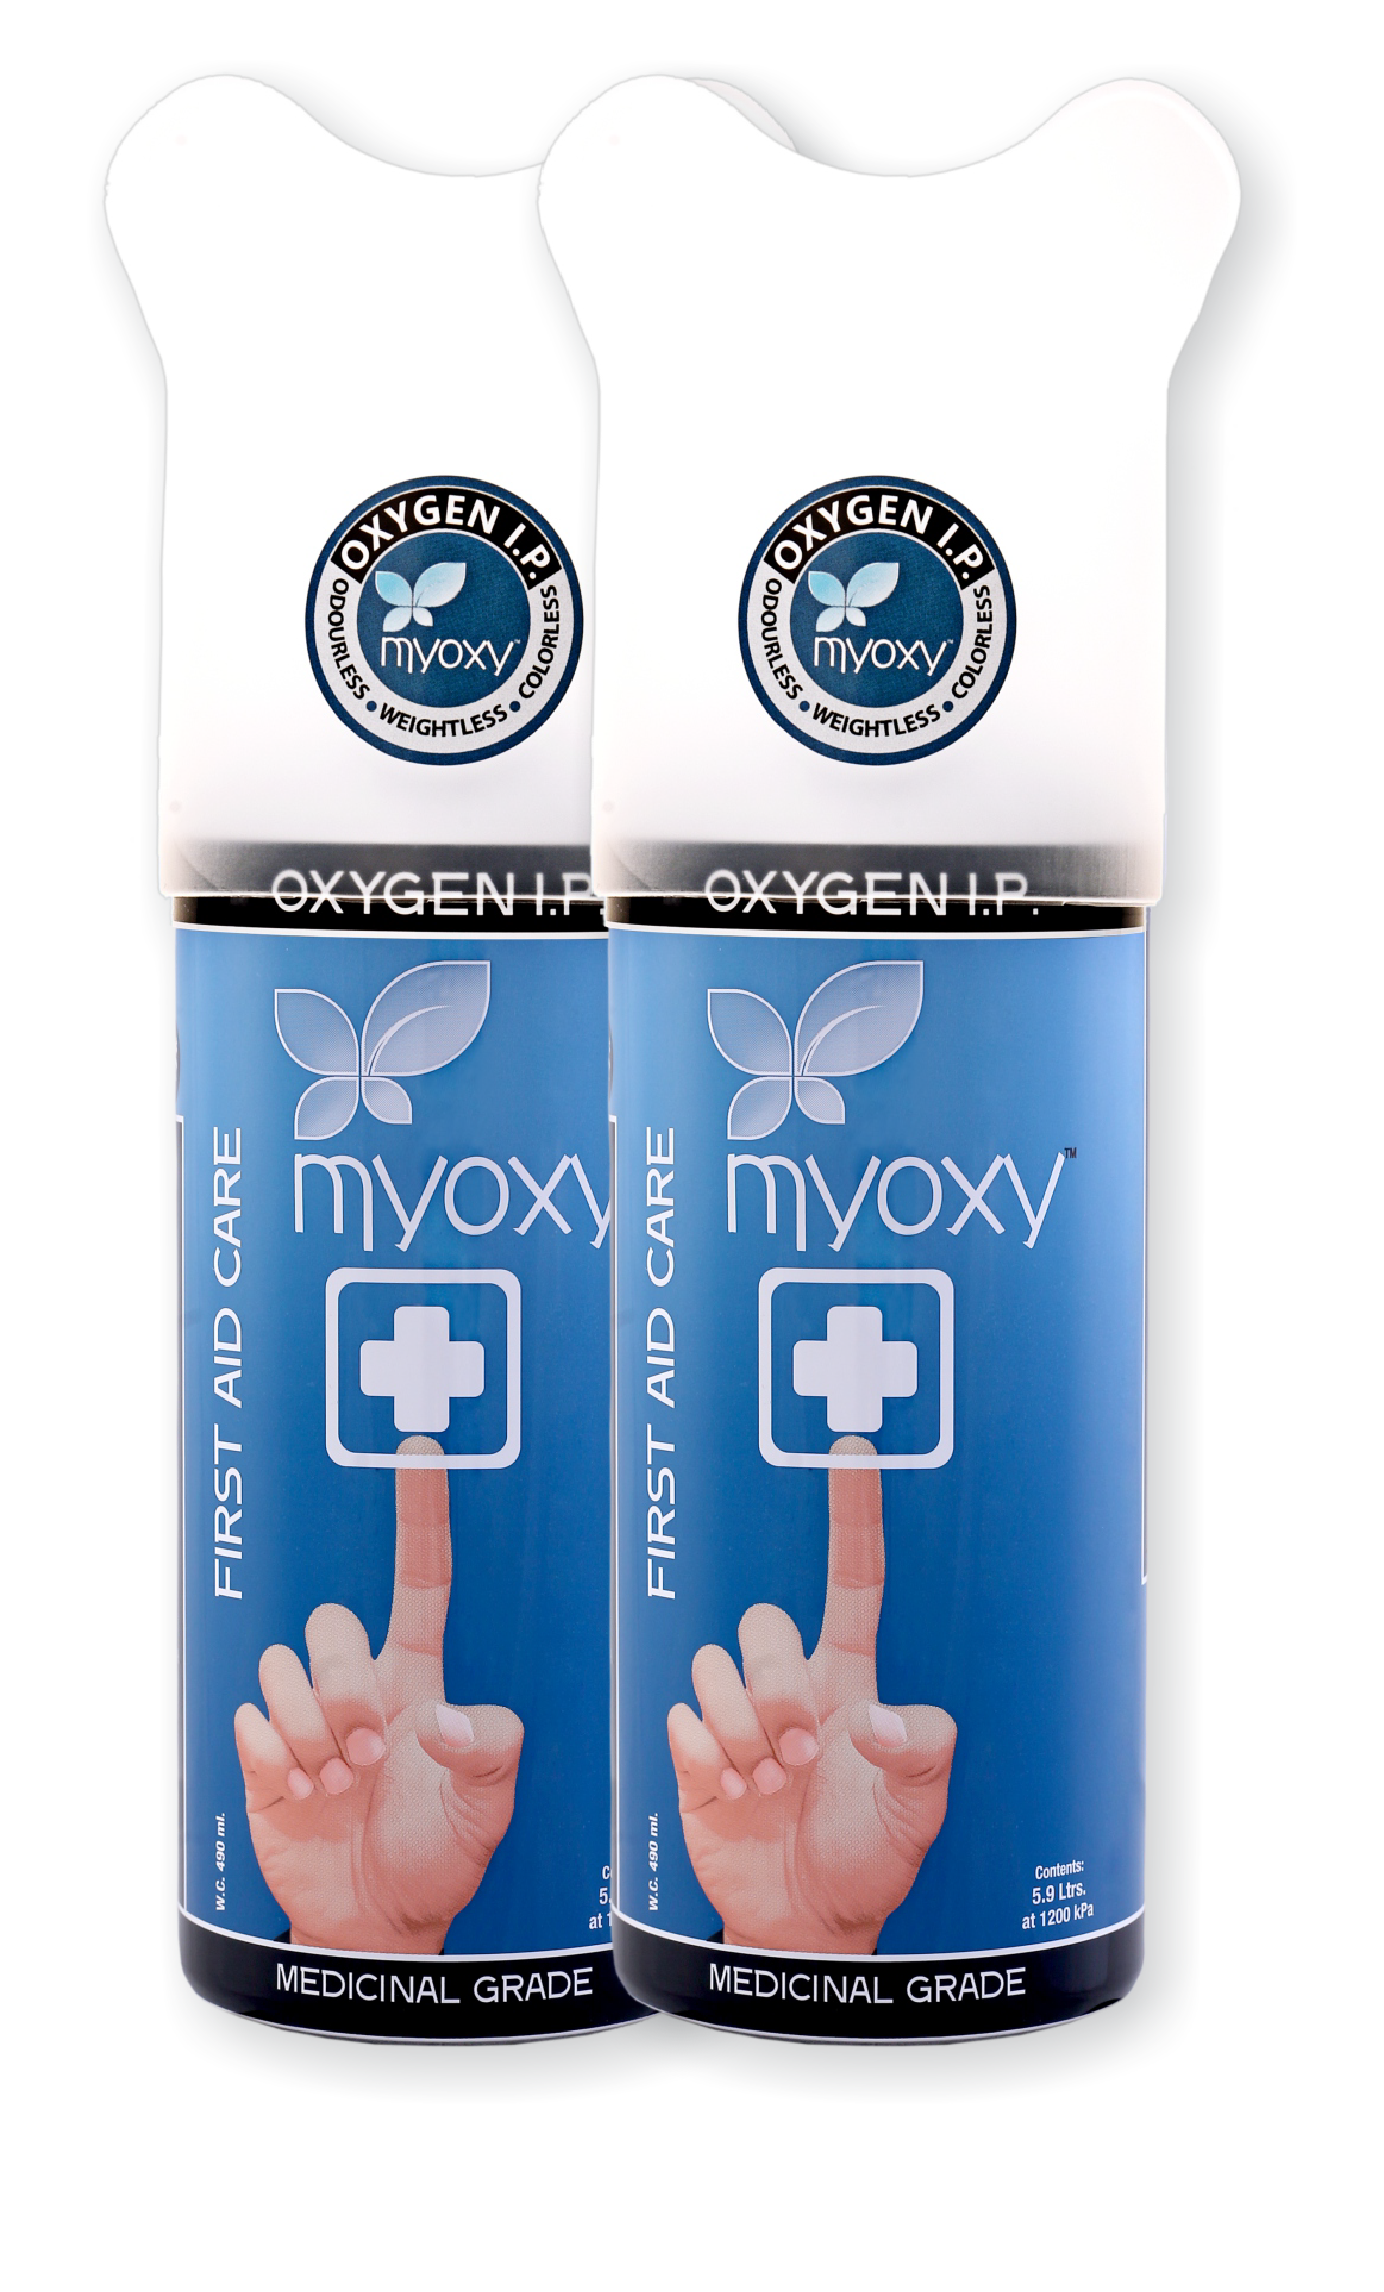 How to use MyOxy oxygen can